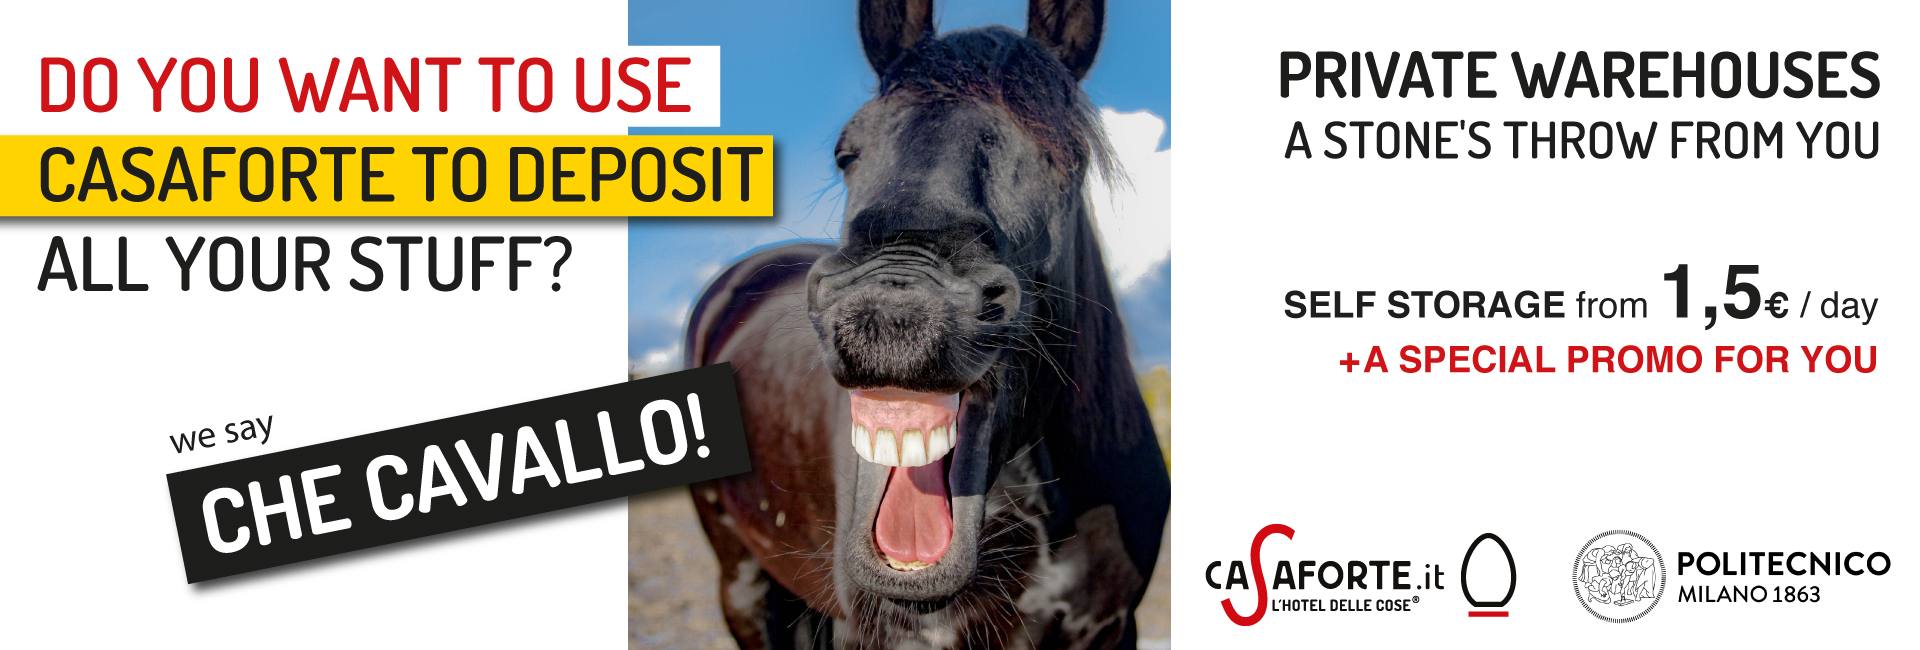 Do you want to use Casaforte to deposit all your stuff? Self storage from 1,5 € per day + a special promo for you